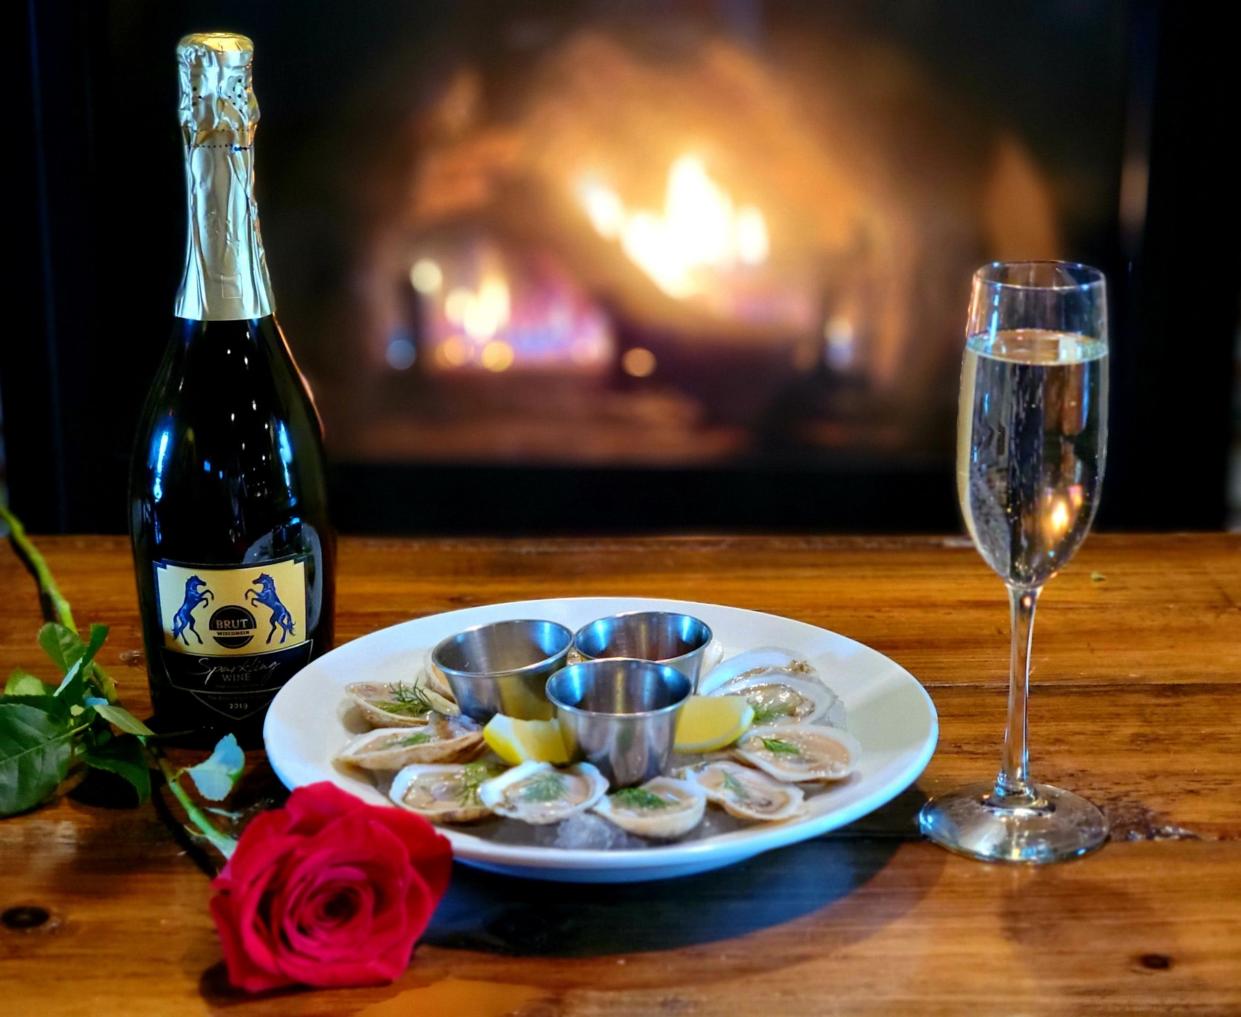 The Blind Horse 2019 Sparkling Brut, an exclusive sparkling wine that was just listed in Forbes as one of the best wines to pair with oysters, especially on Valentine's Day.